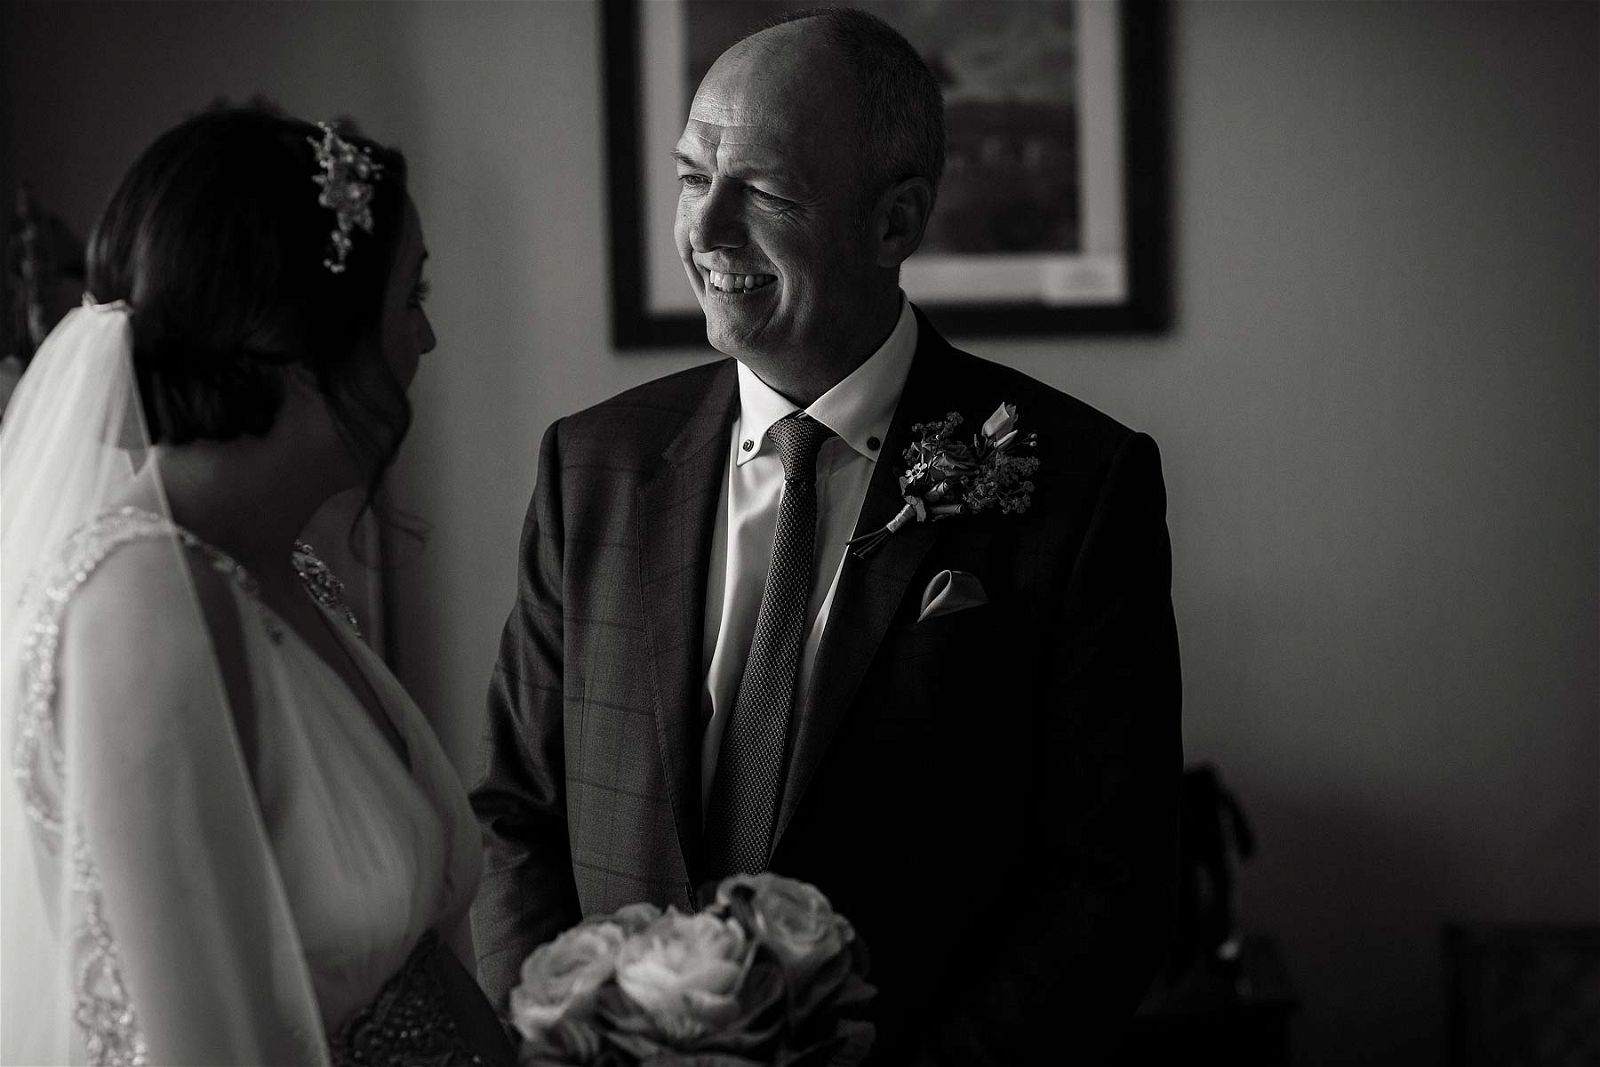 Emotions captured as Bride sees daughter for first time in wedding gown at Sandon Hall in Stafford by Stafford Documentary Wedding Photographer Stuart James